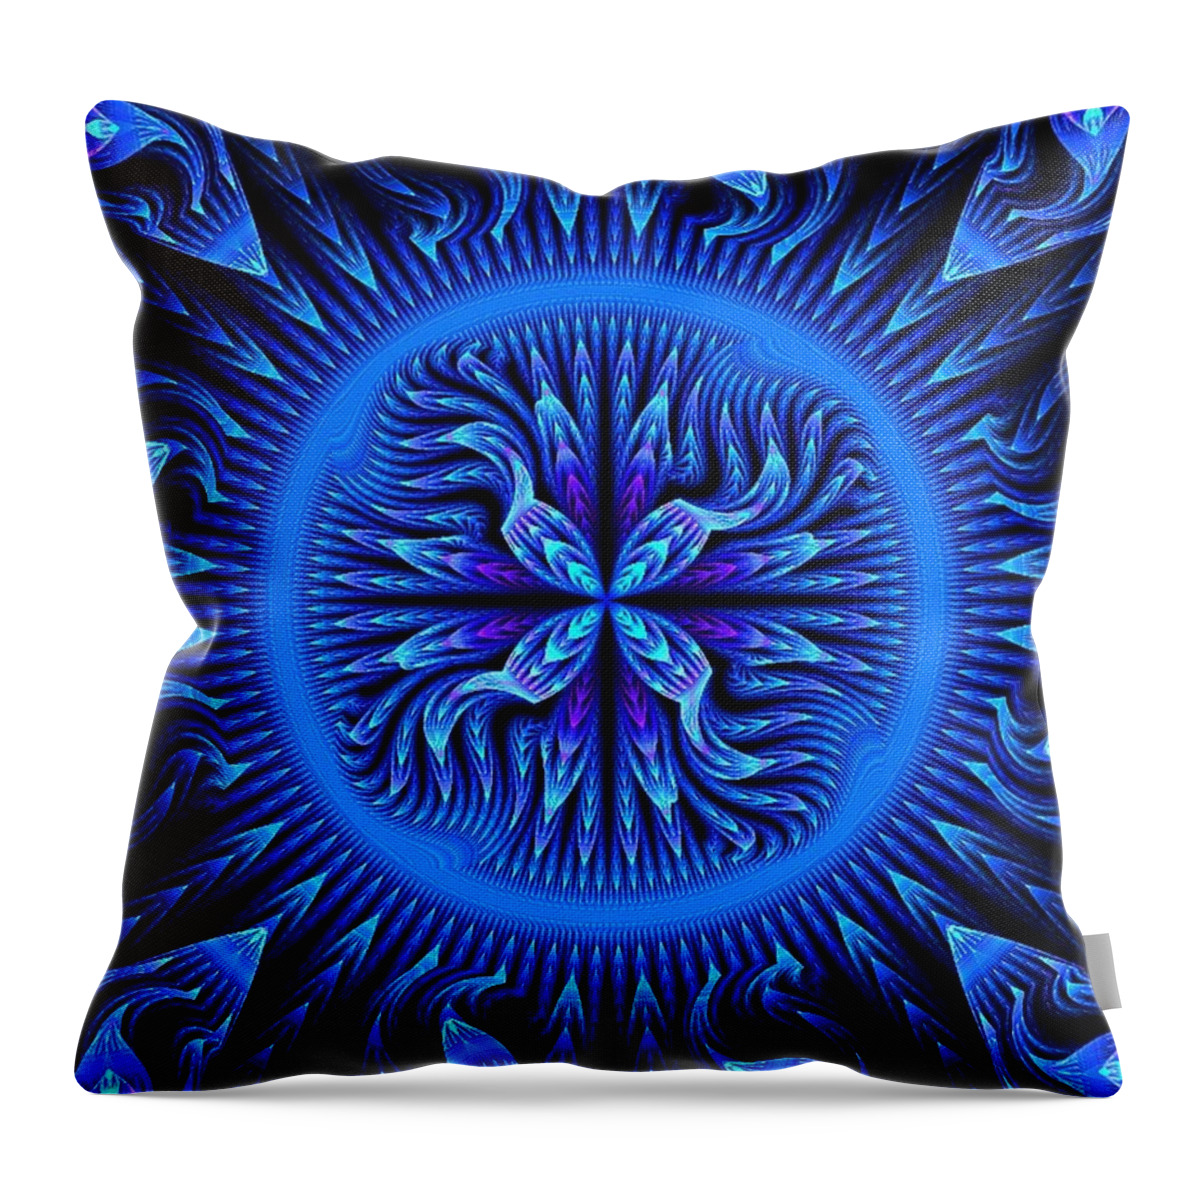 Blue Throw Pillow featuring the digital art Blue for You by Norma Jean Lipert